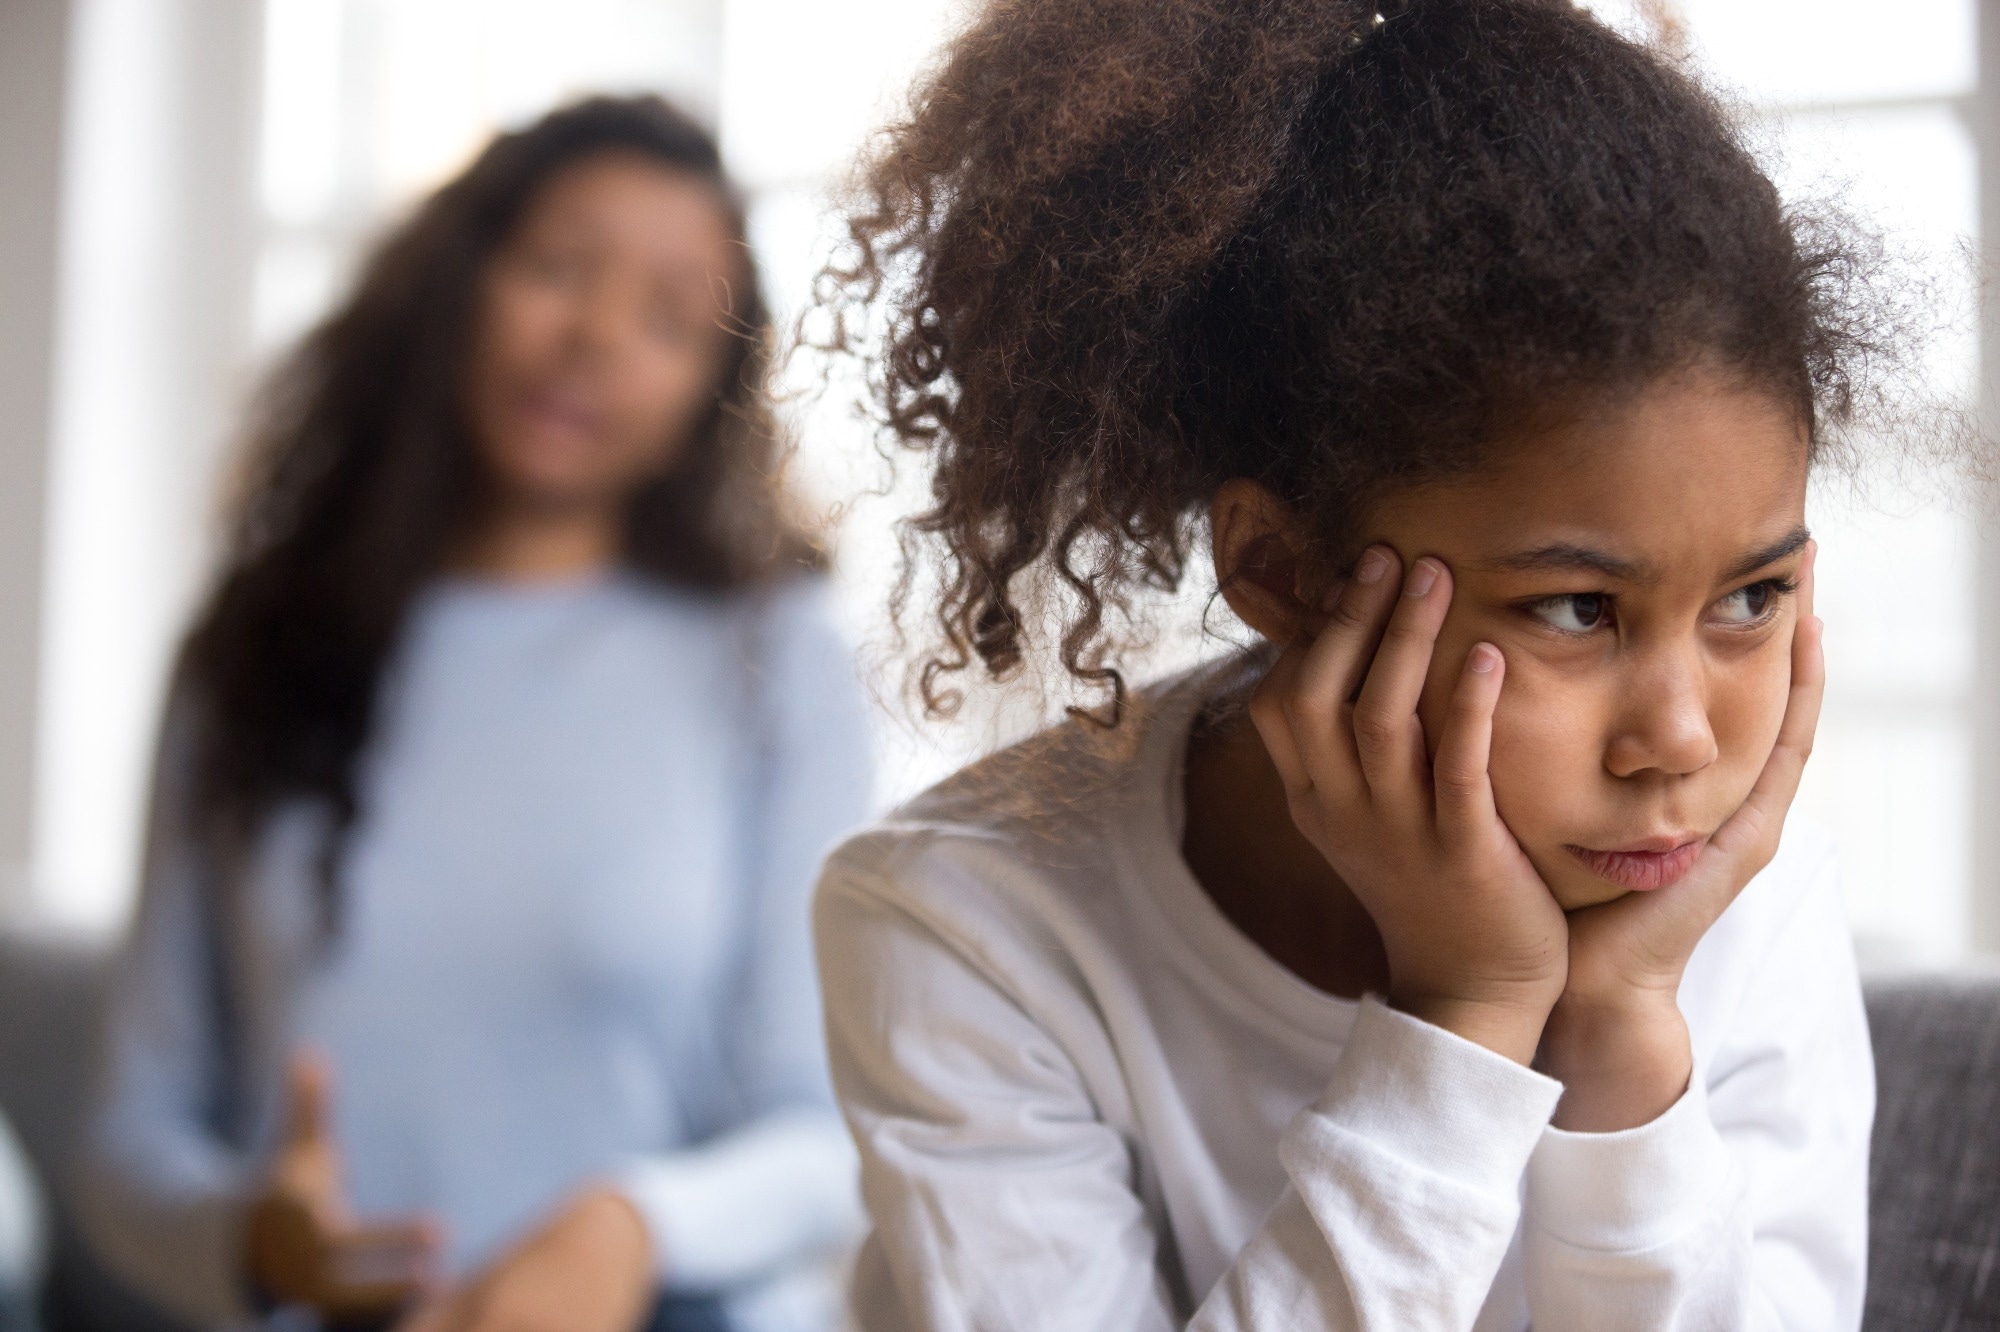 Teen brains with depression show heightened sensitivity to parental criticism